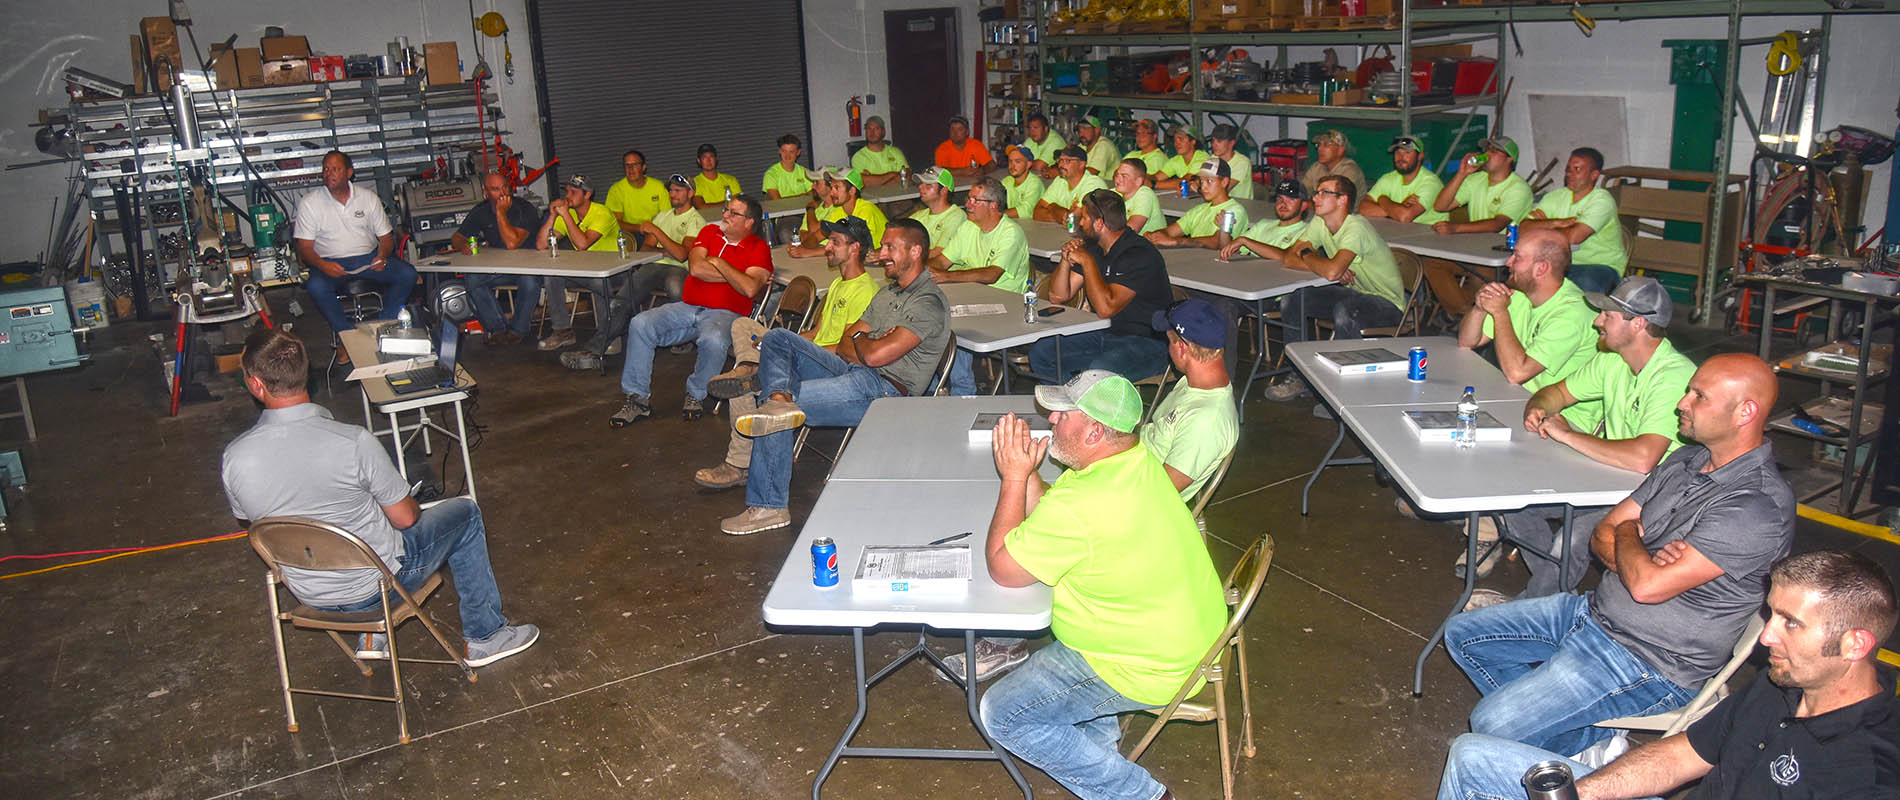 A group of NEI electricians gathered in the shop for a safety training session